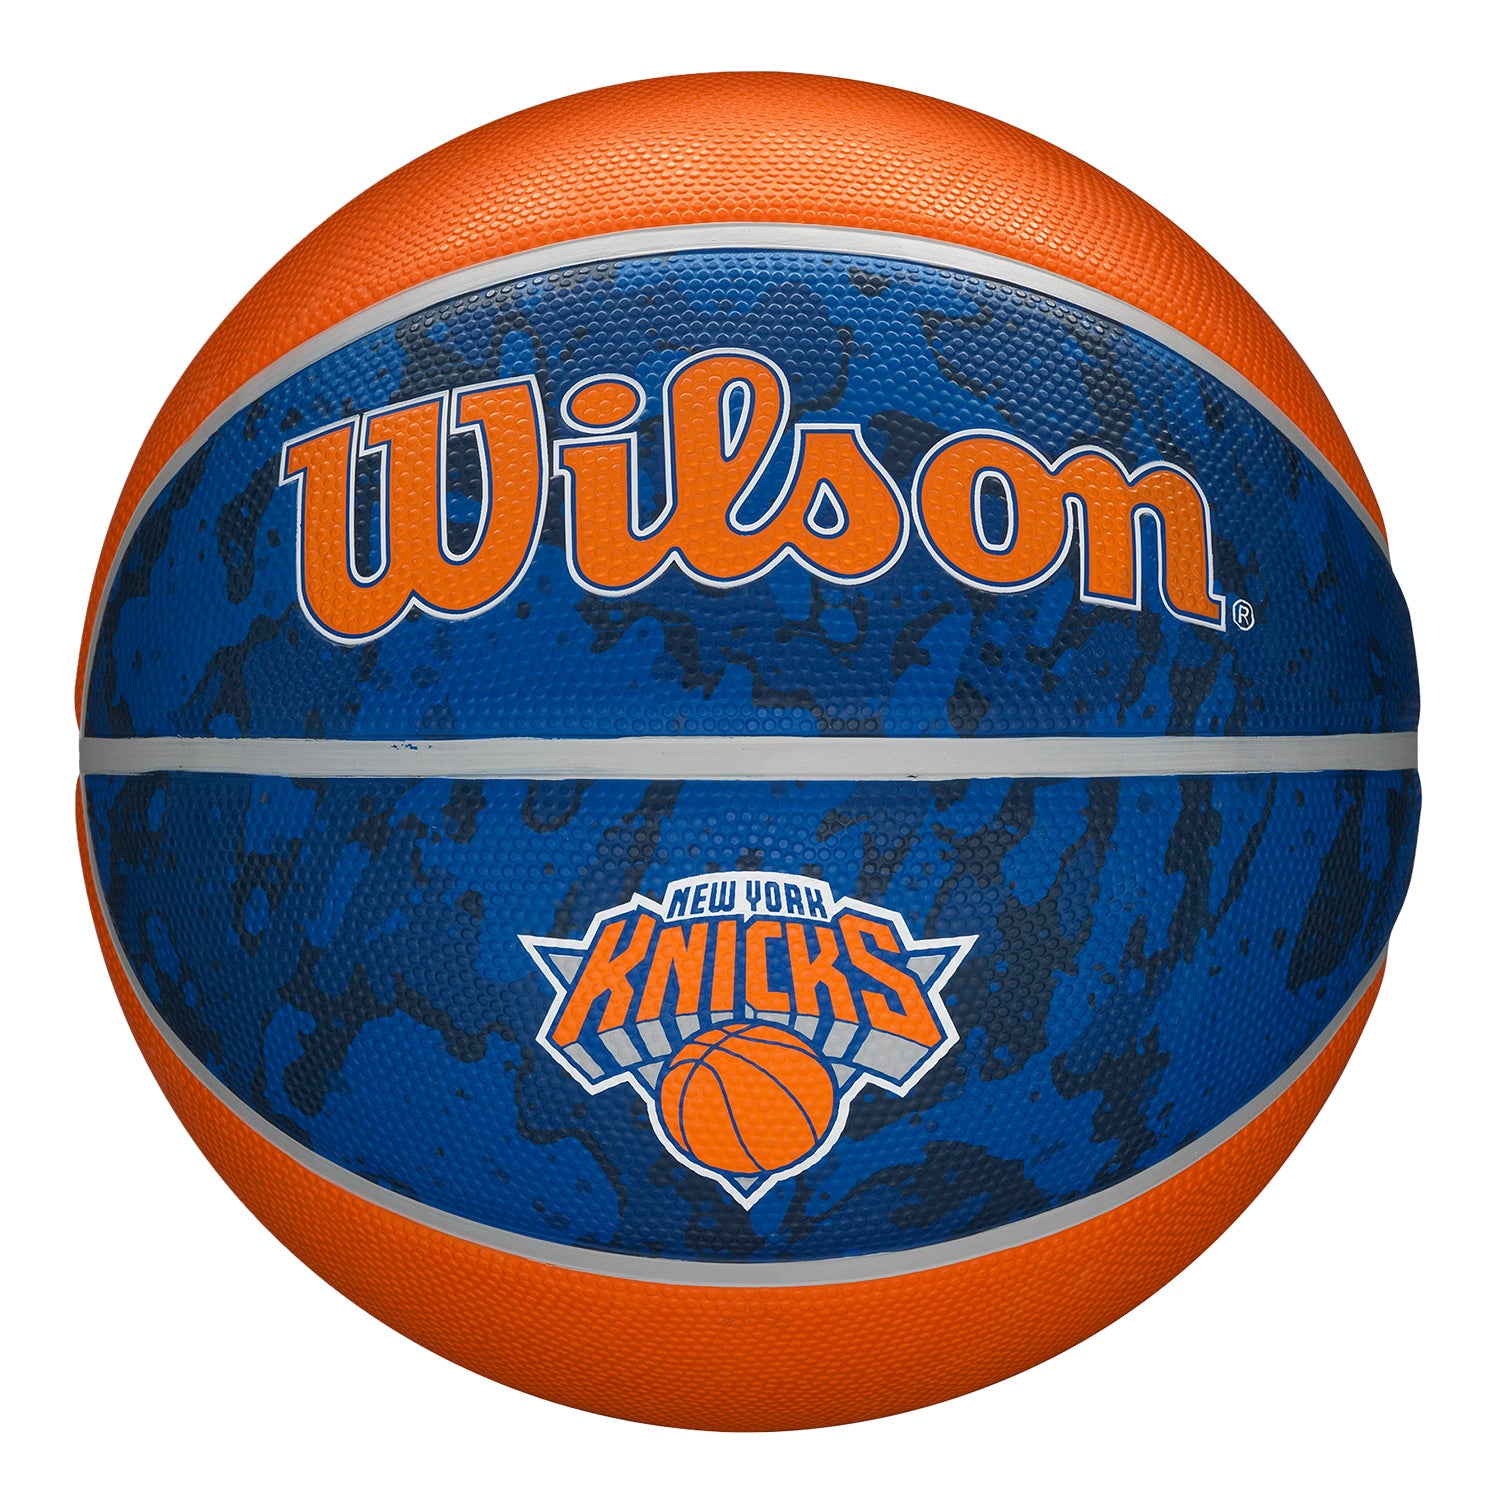 Wilson Knicks Tie Dye Basketball - In Blue And Orange - Front View